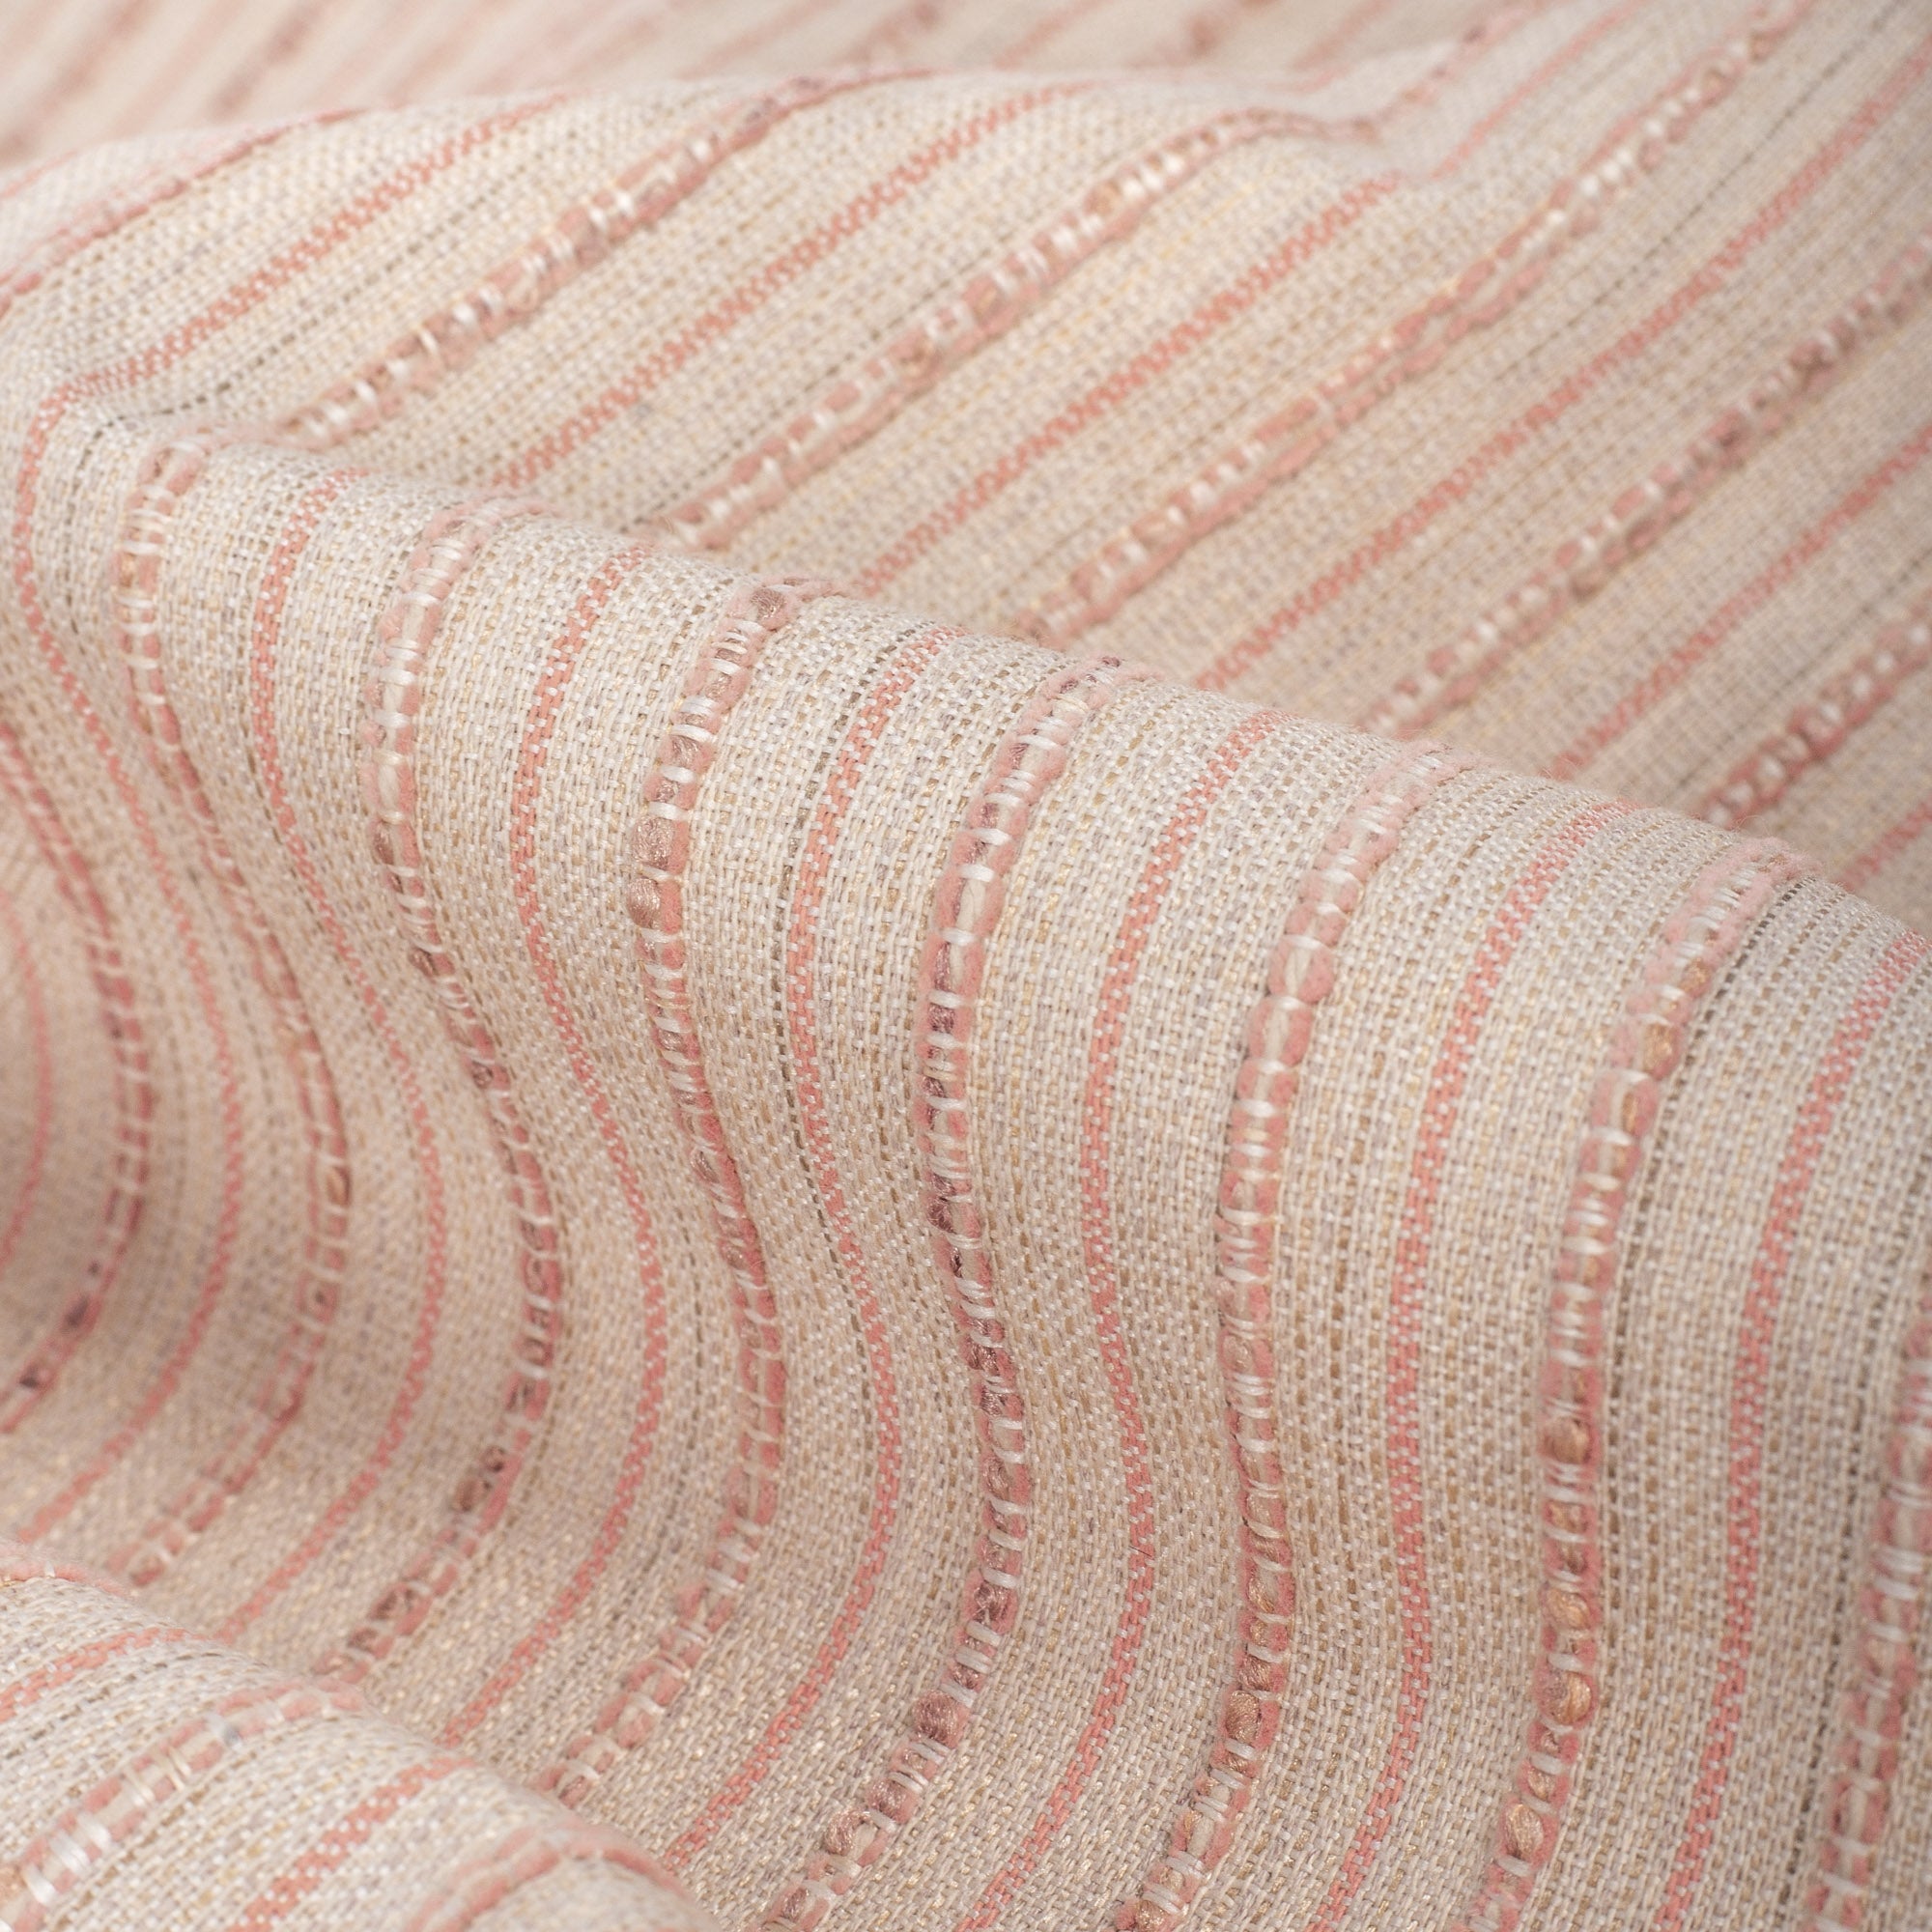 Misto Coral Blush, a light pink and light tan horizontal striped Crypton Home performance fabric : close up view